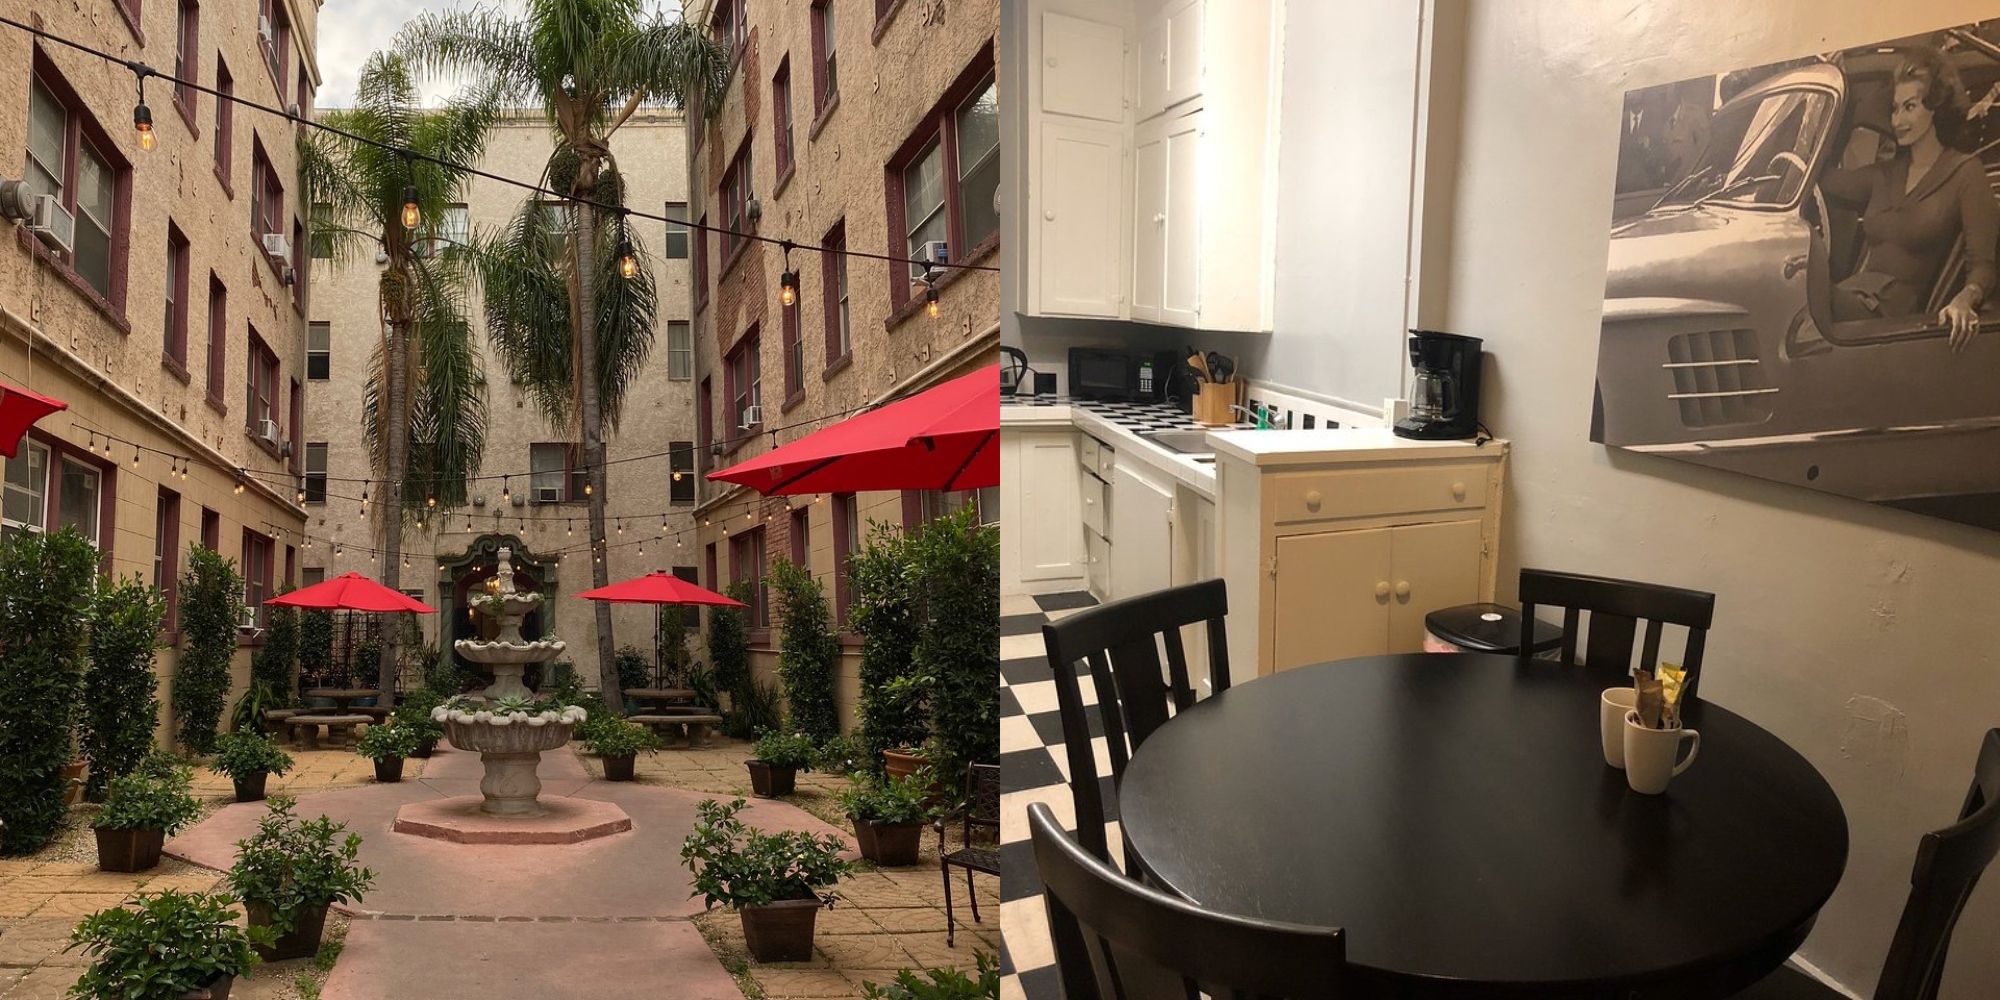 courtyard and ktichen in suite at the canterbury hotel in los angeles